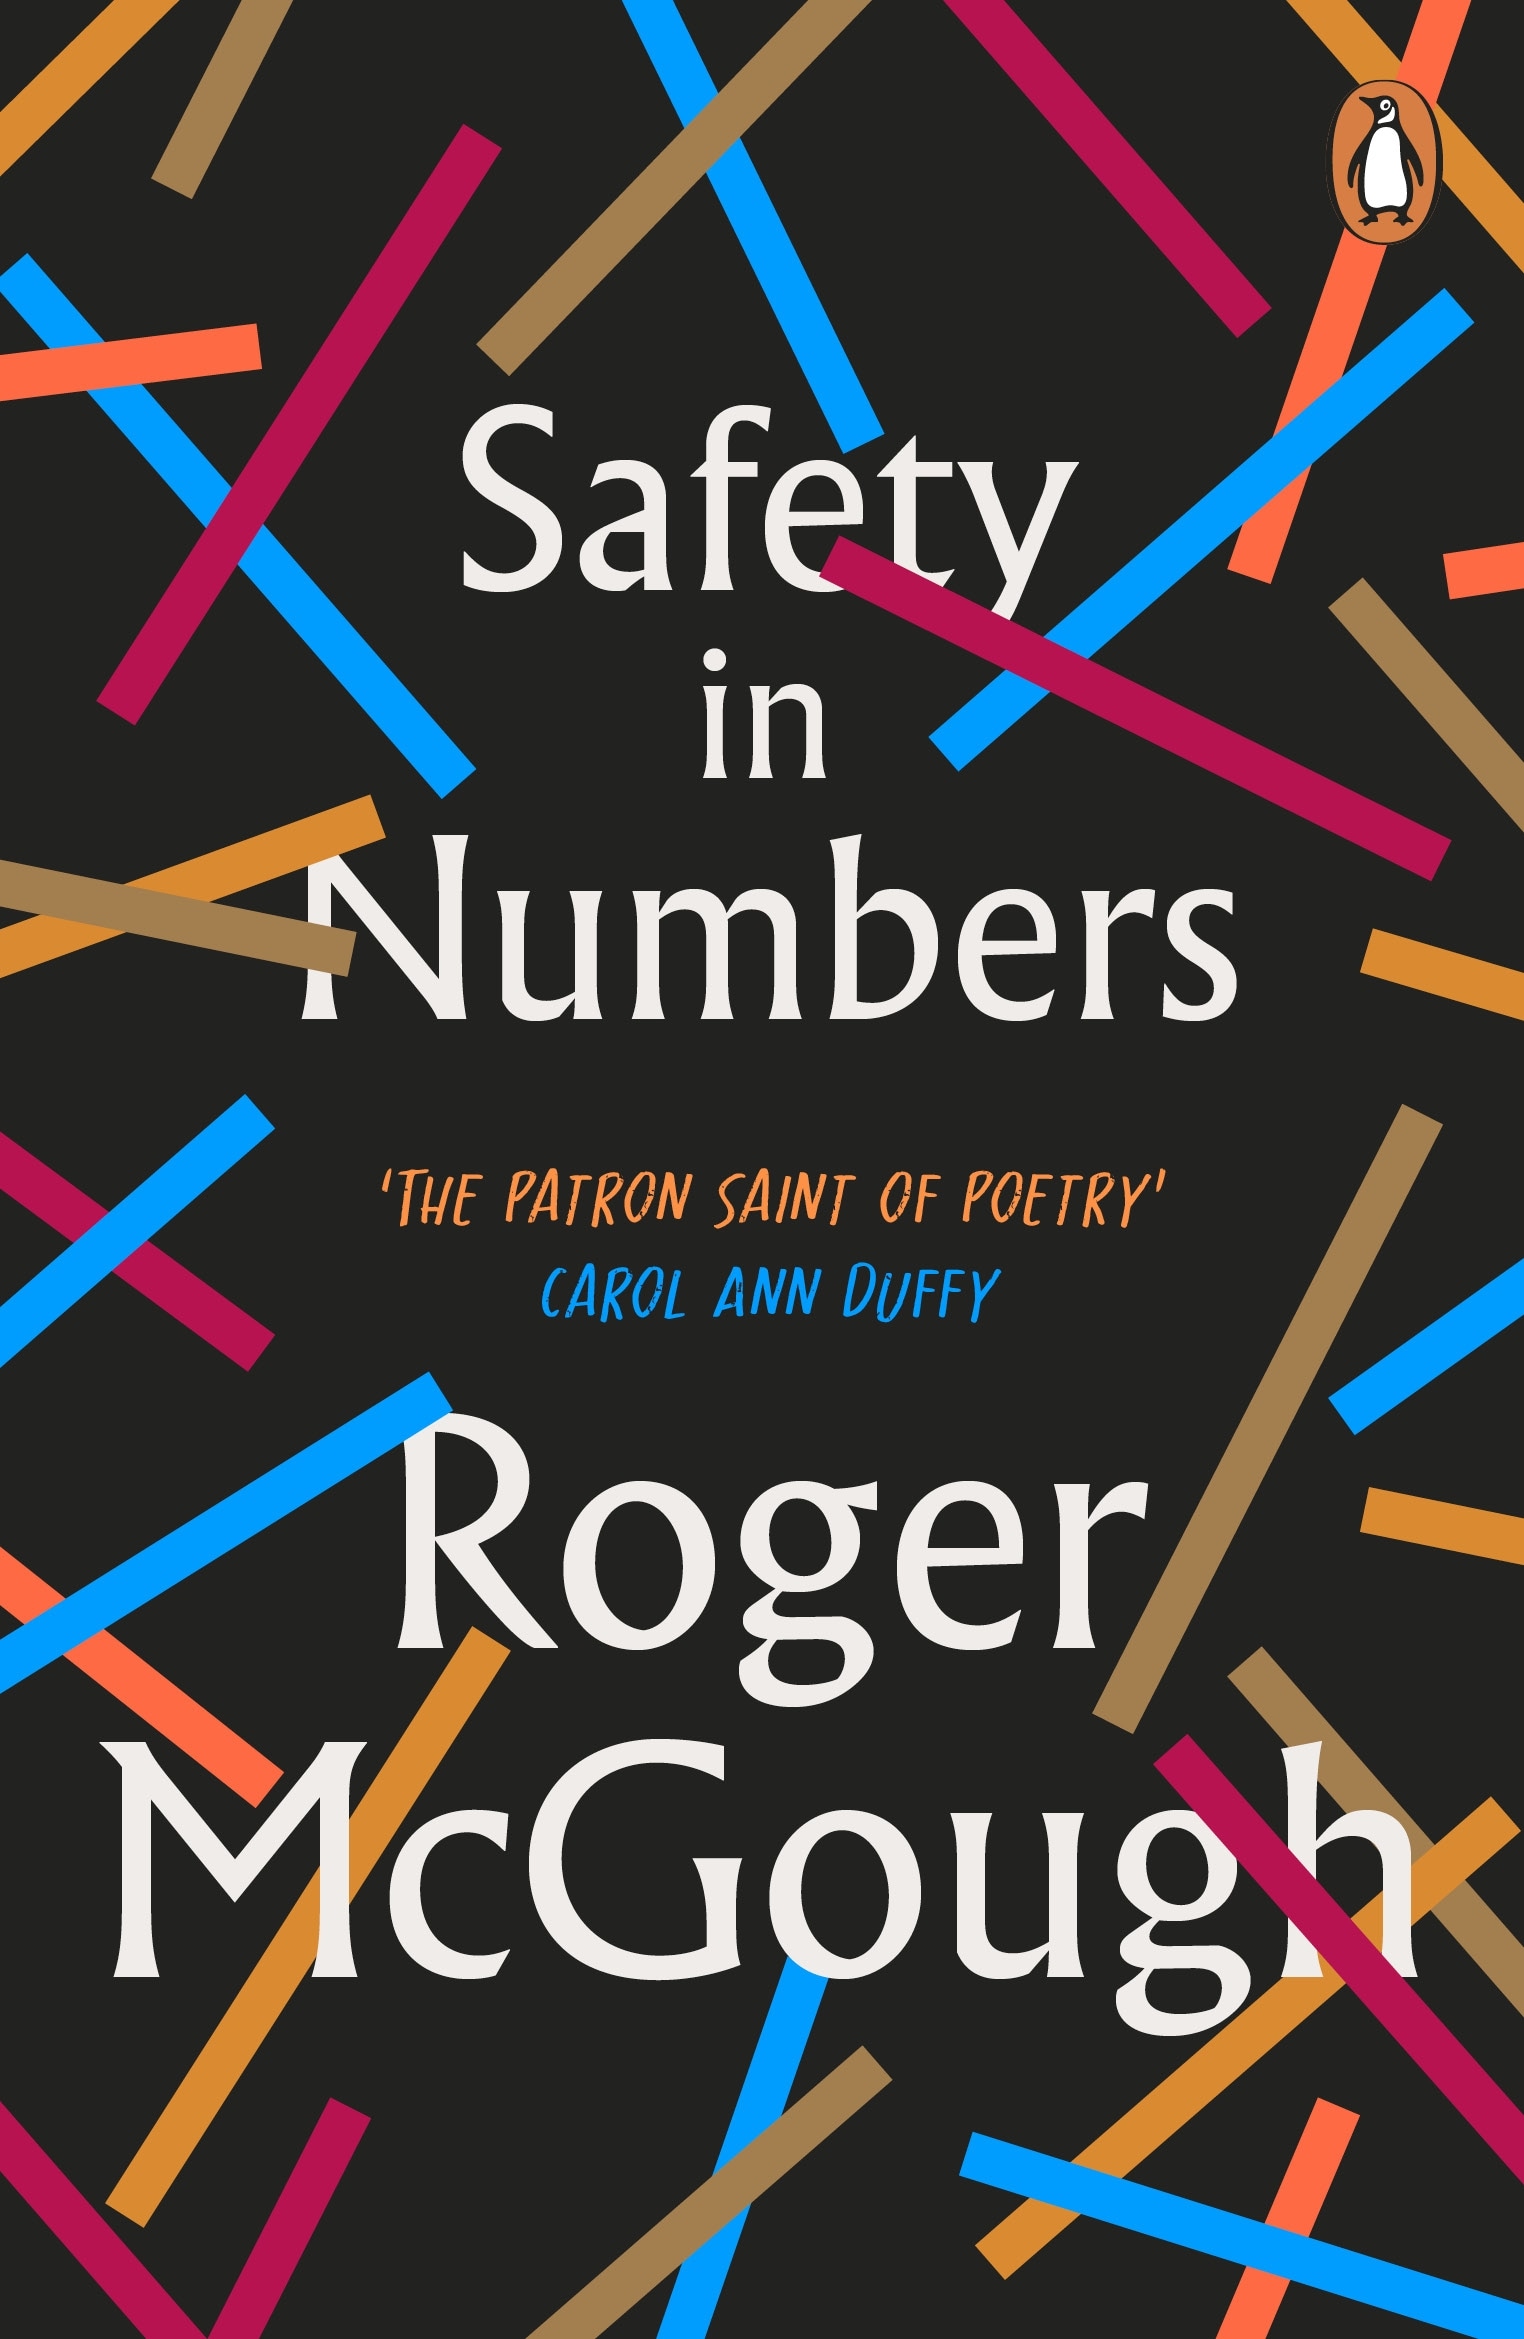 Book “Safety in Numbers” by Roger McGough — November 11, 2021